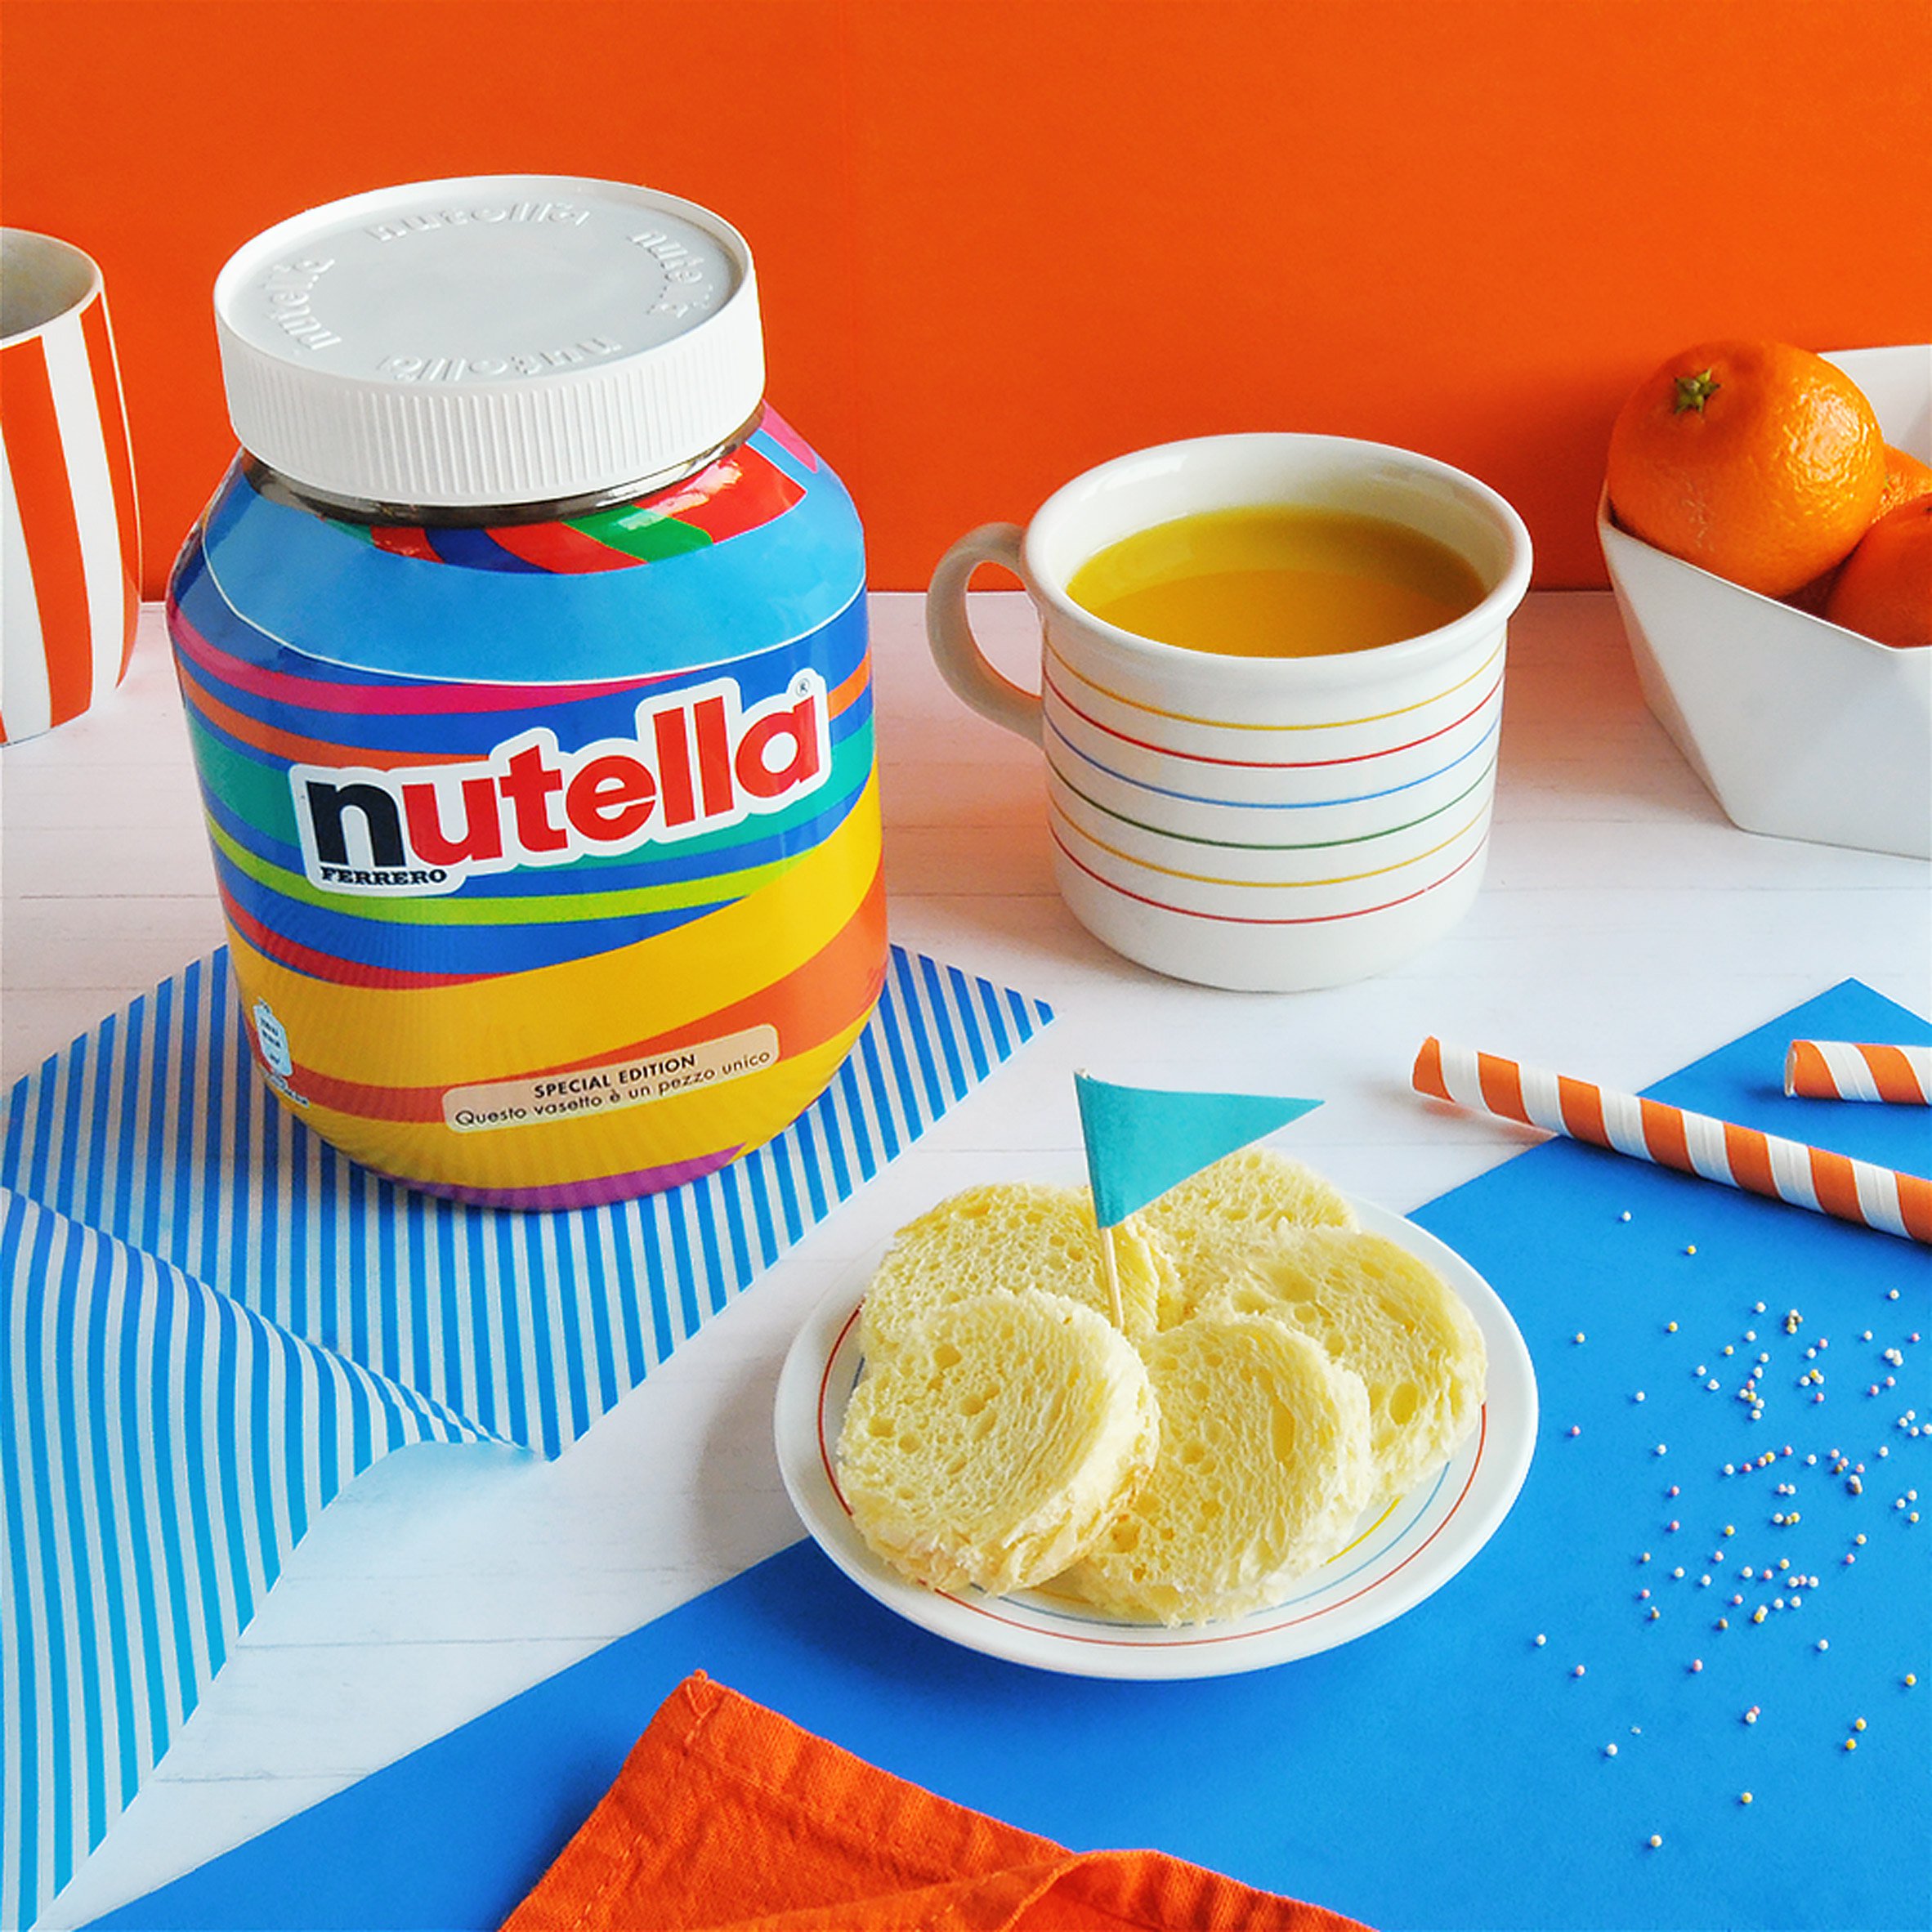 nutella-unica-packaging-design-products-_dezeen_2364_col_3.jpg